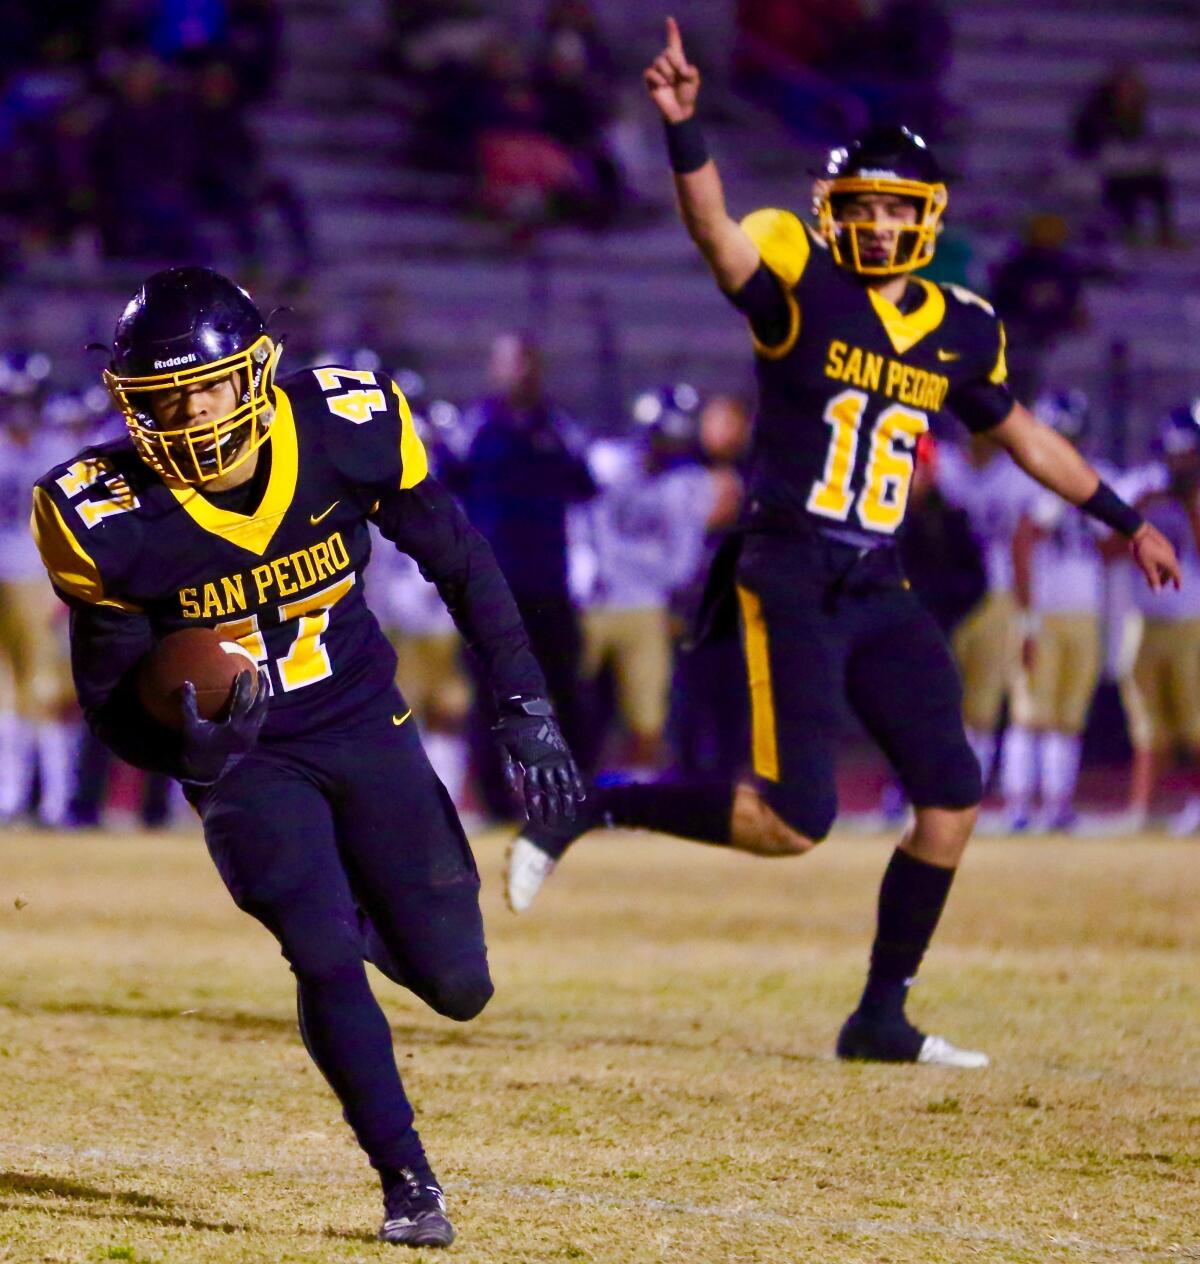 Josh Ward scores on a two-yard run to put San Pedro on the scoreboard first in Friday night’s City Section Open Division semifinal against Birmingham on Friday.